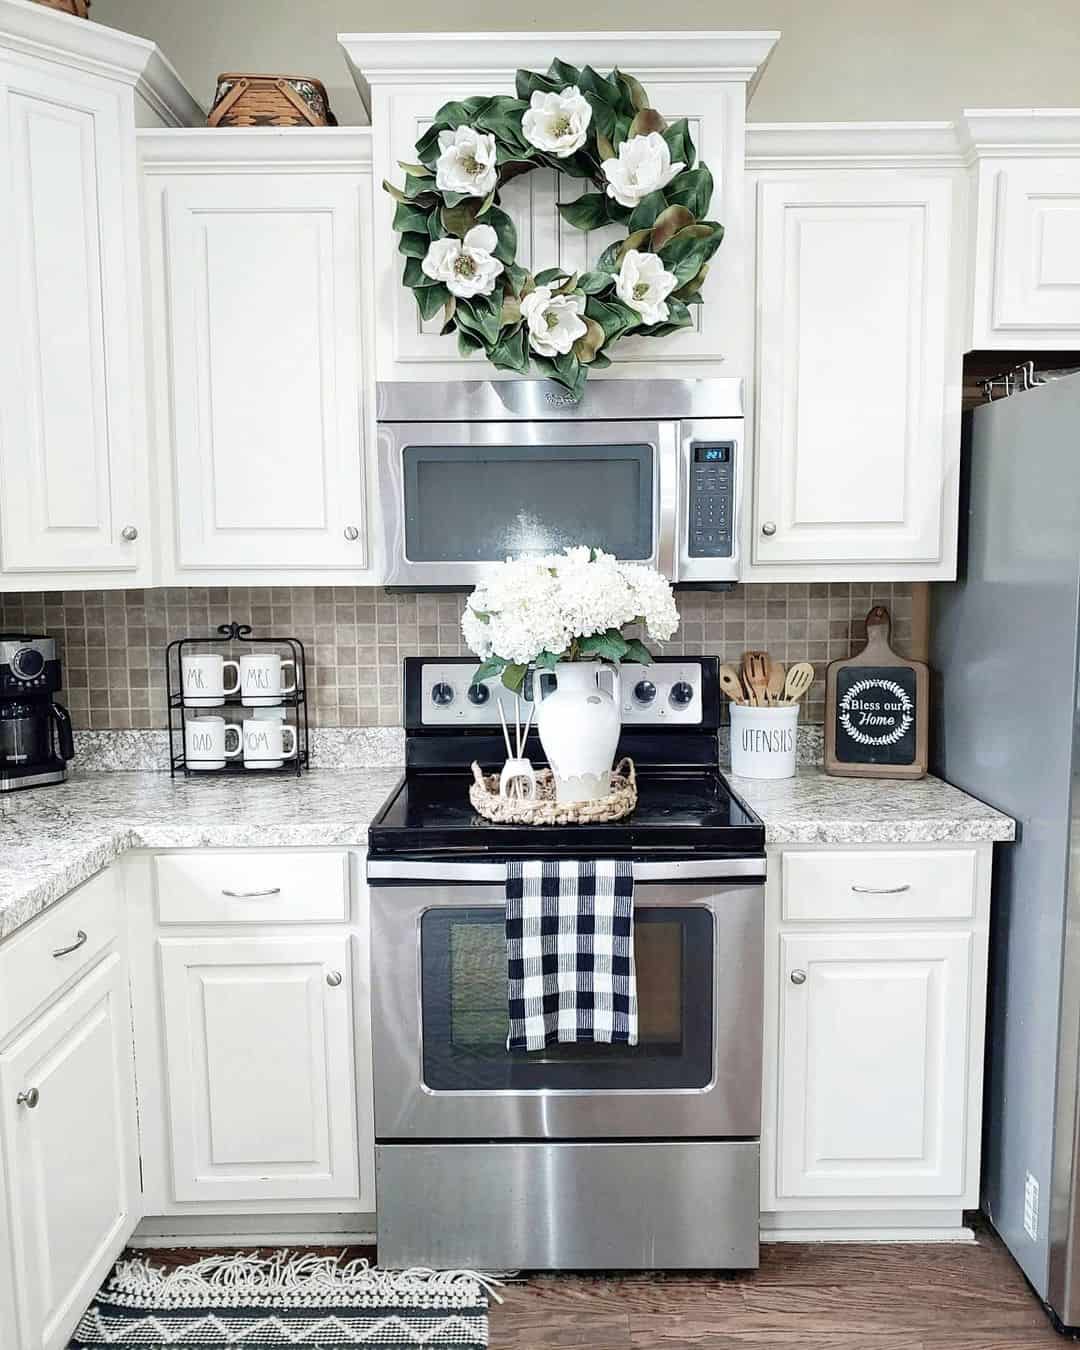 Popular Decor Ideas and Accessories for Your Kitchen Style - The